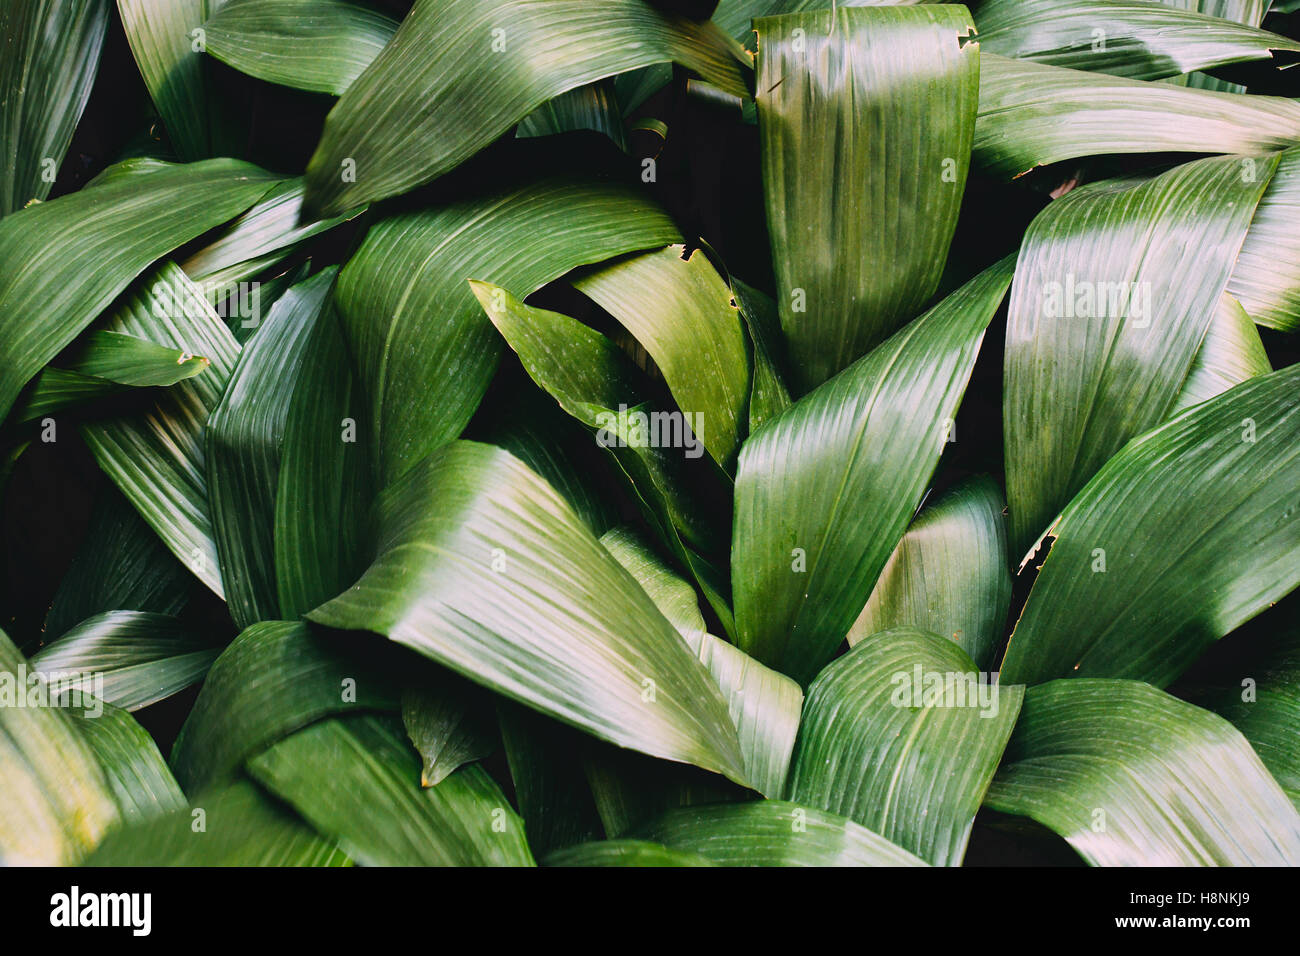 A closeup on a bunch of green leaves growing together Stock Photo